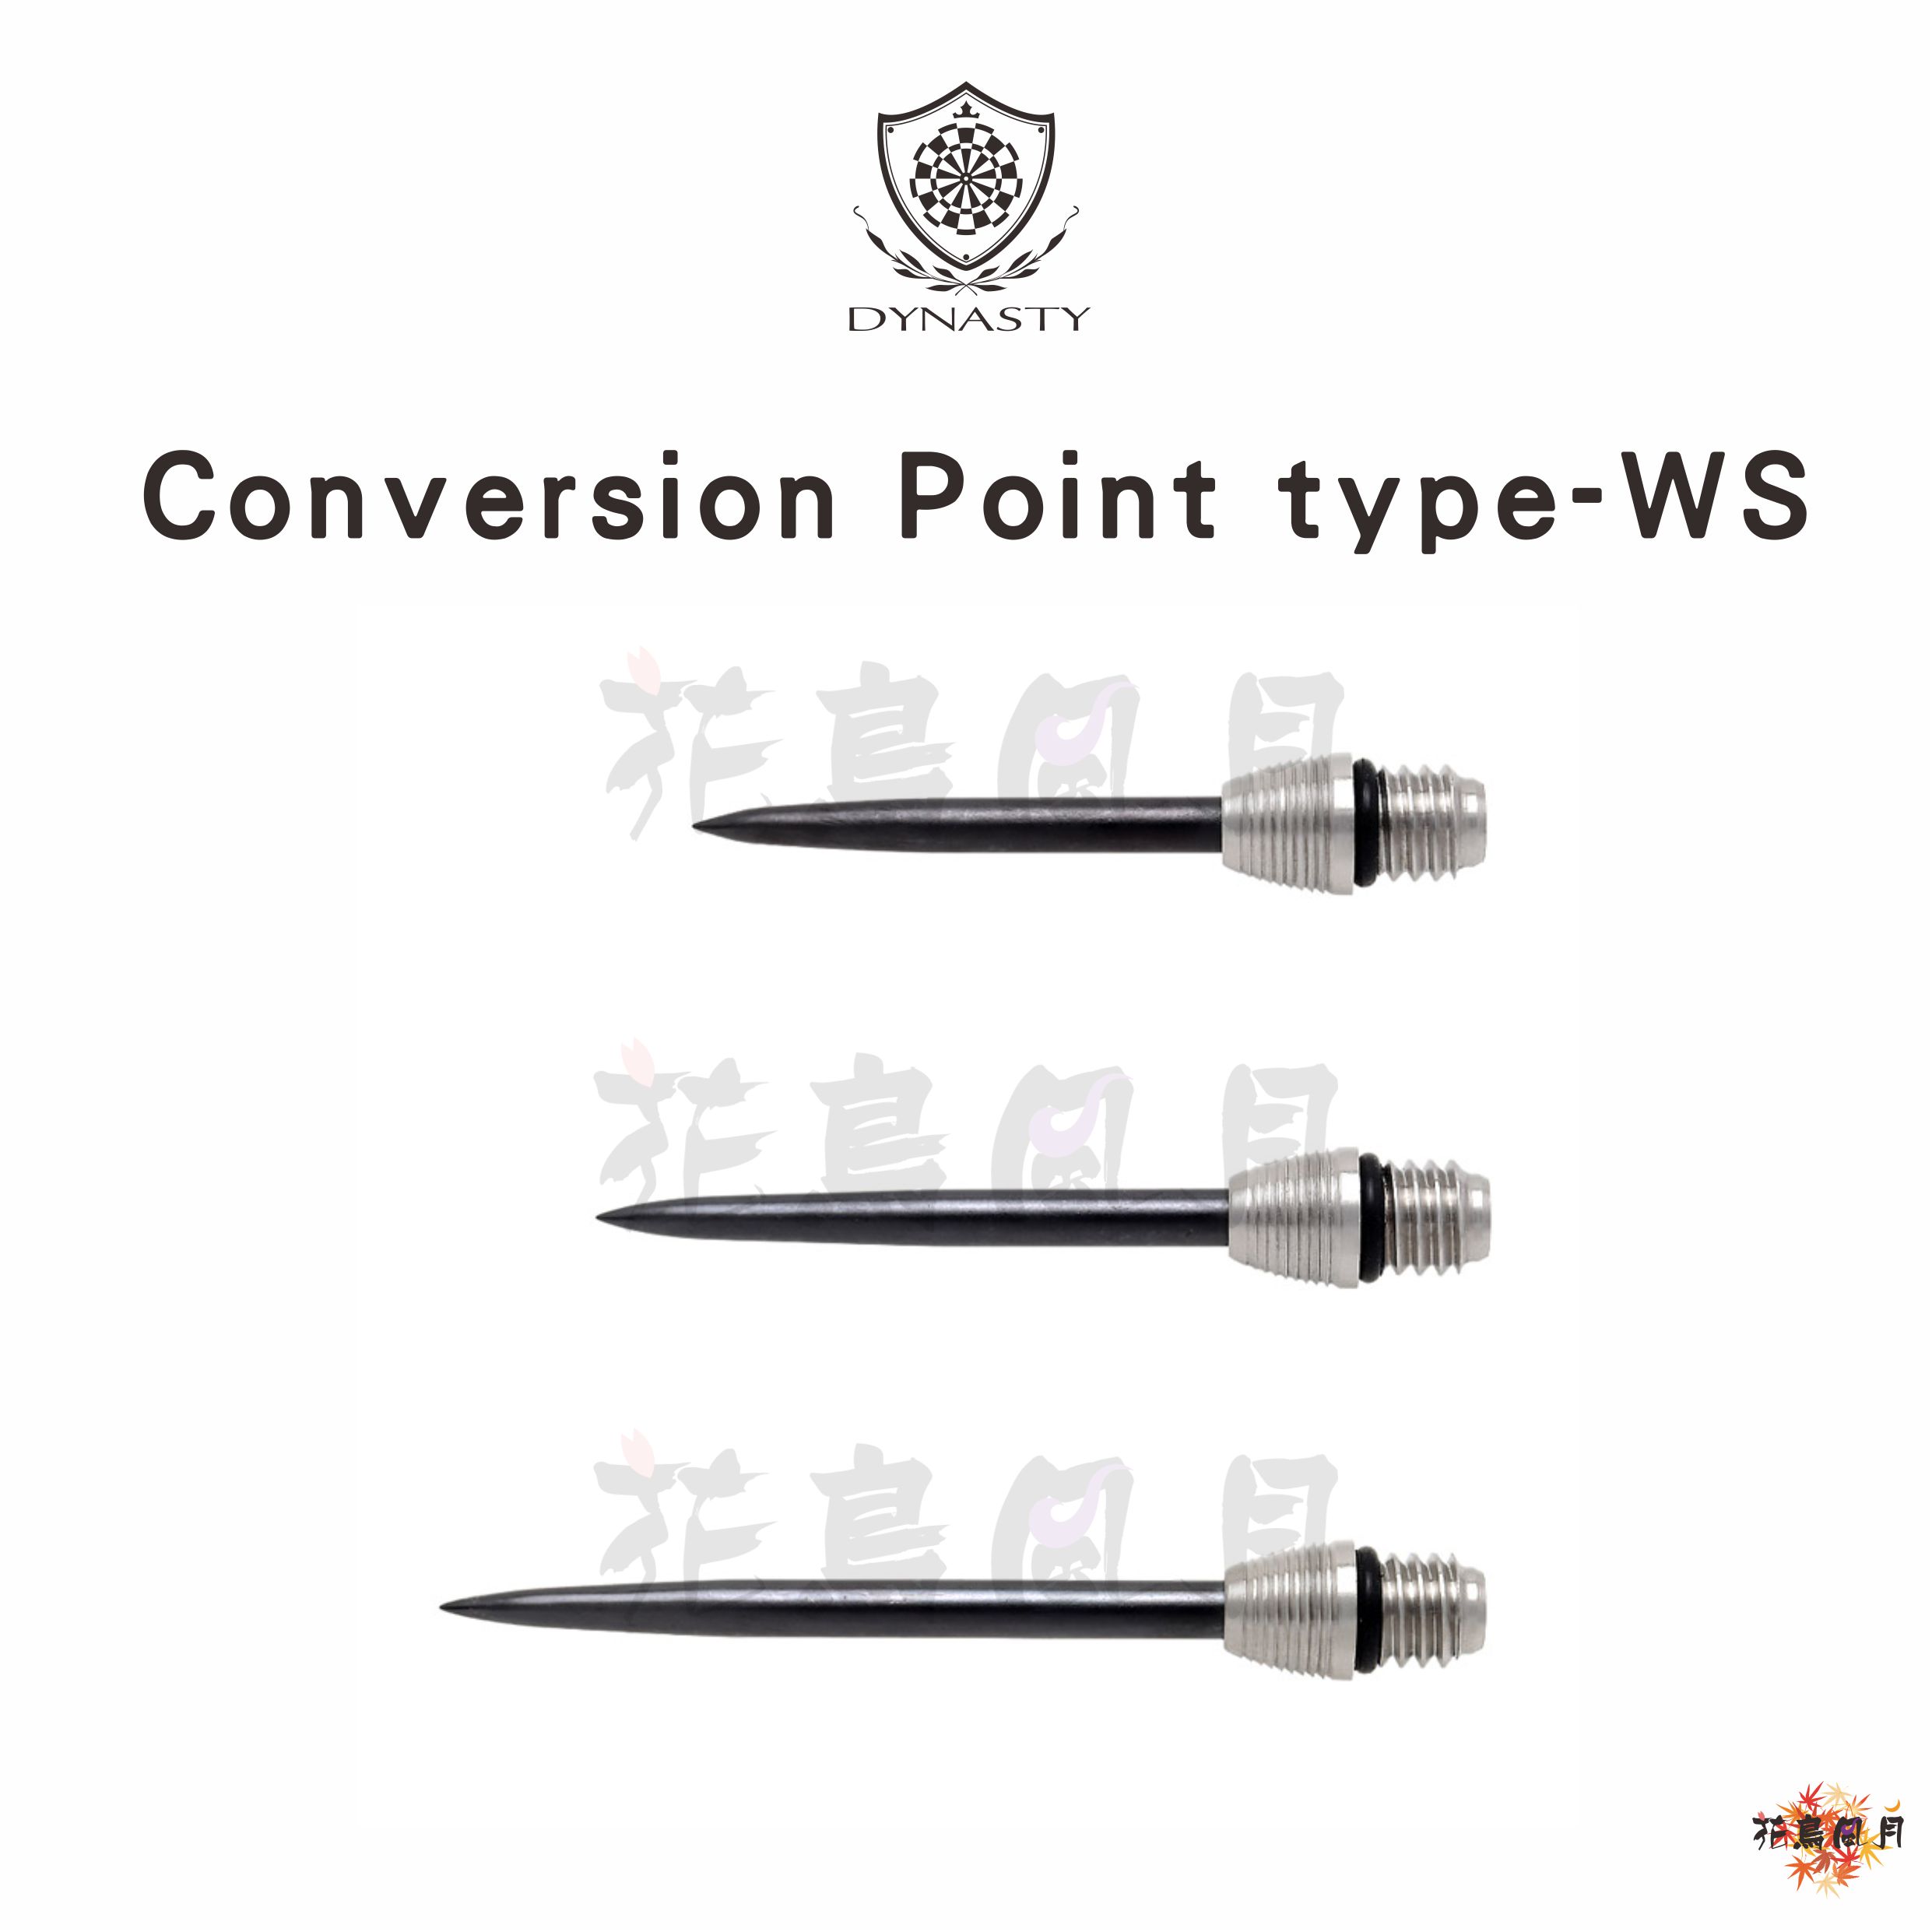 DYNASTY-CONVERSIONPOINT-WS　